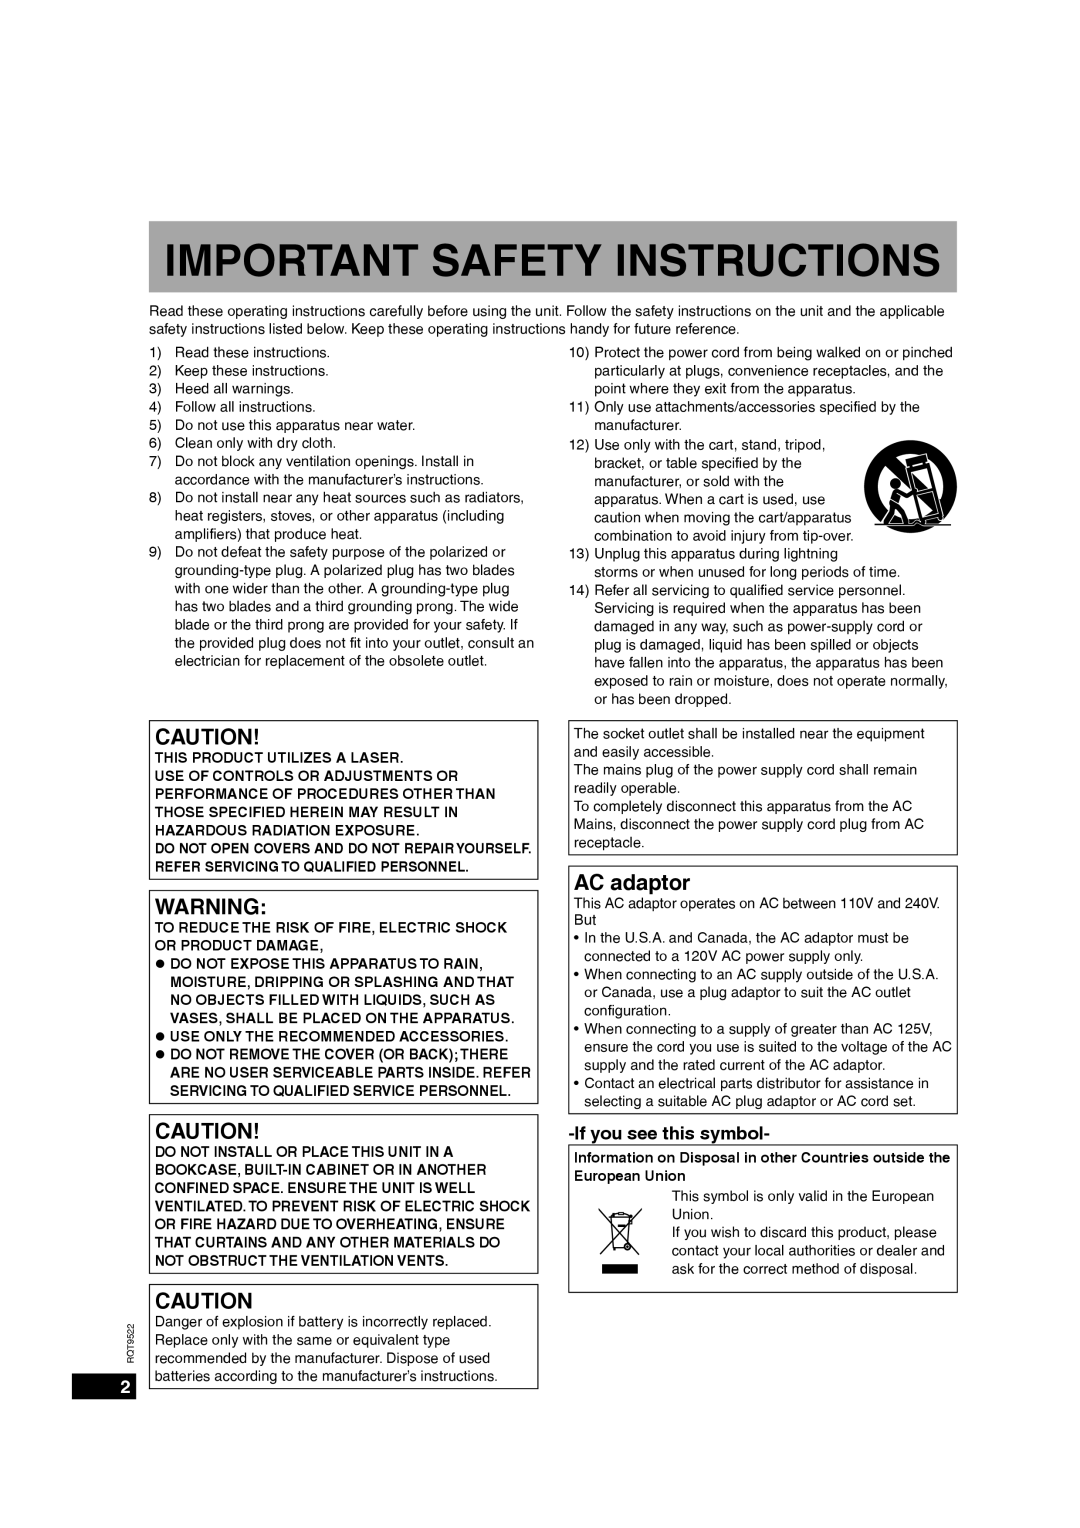 Panasonic MW-10 operating instructions AC adaptor, Ifyou see this symbol, Important Safety Instructions 